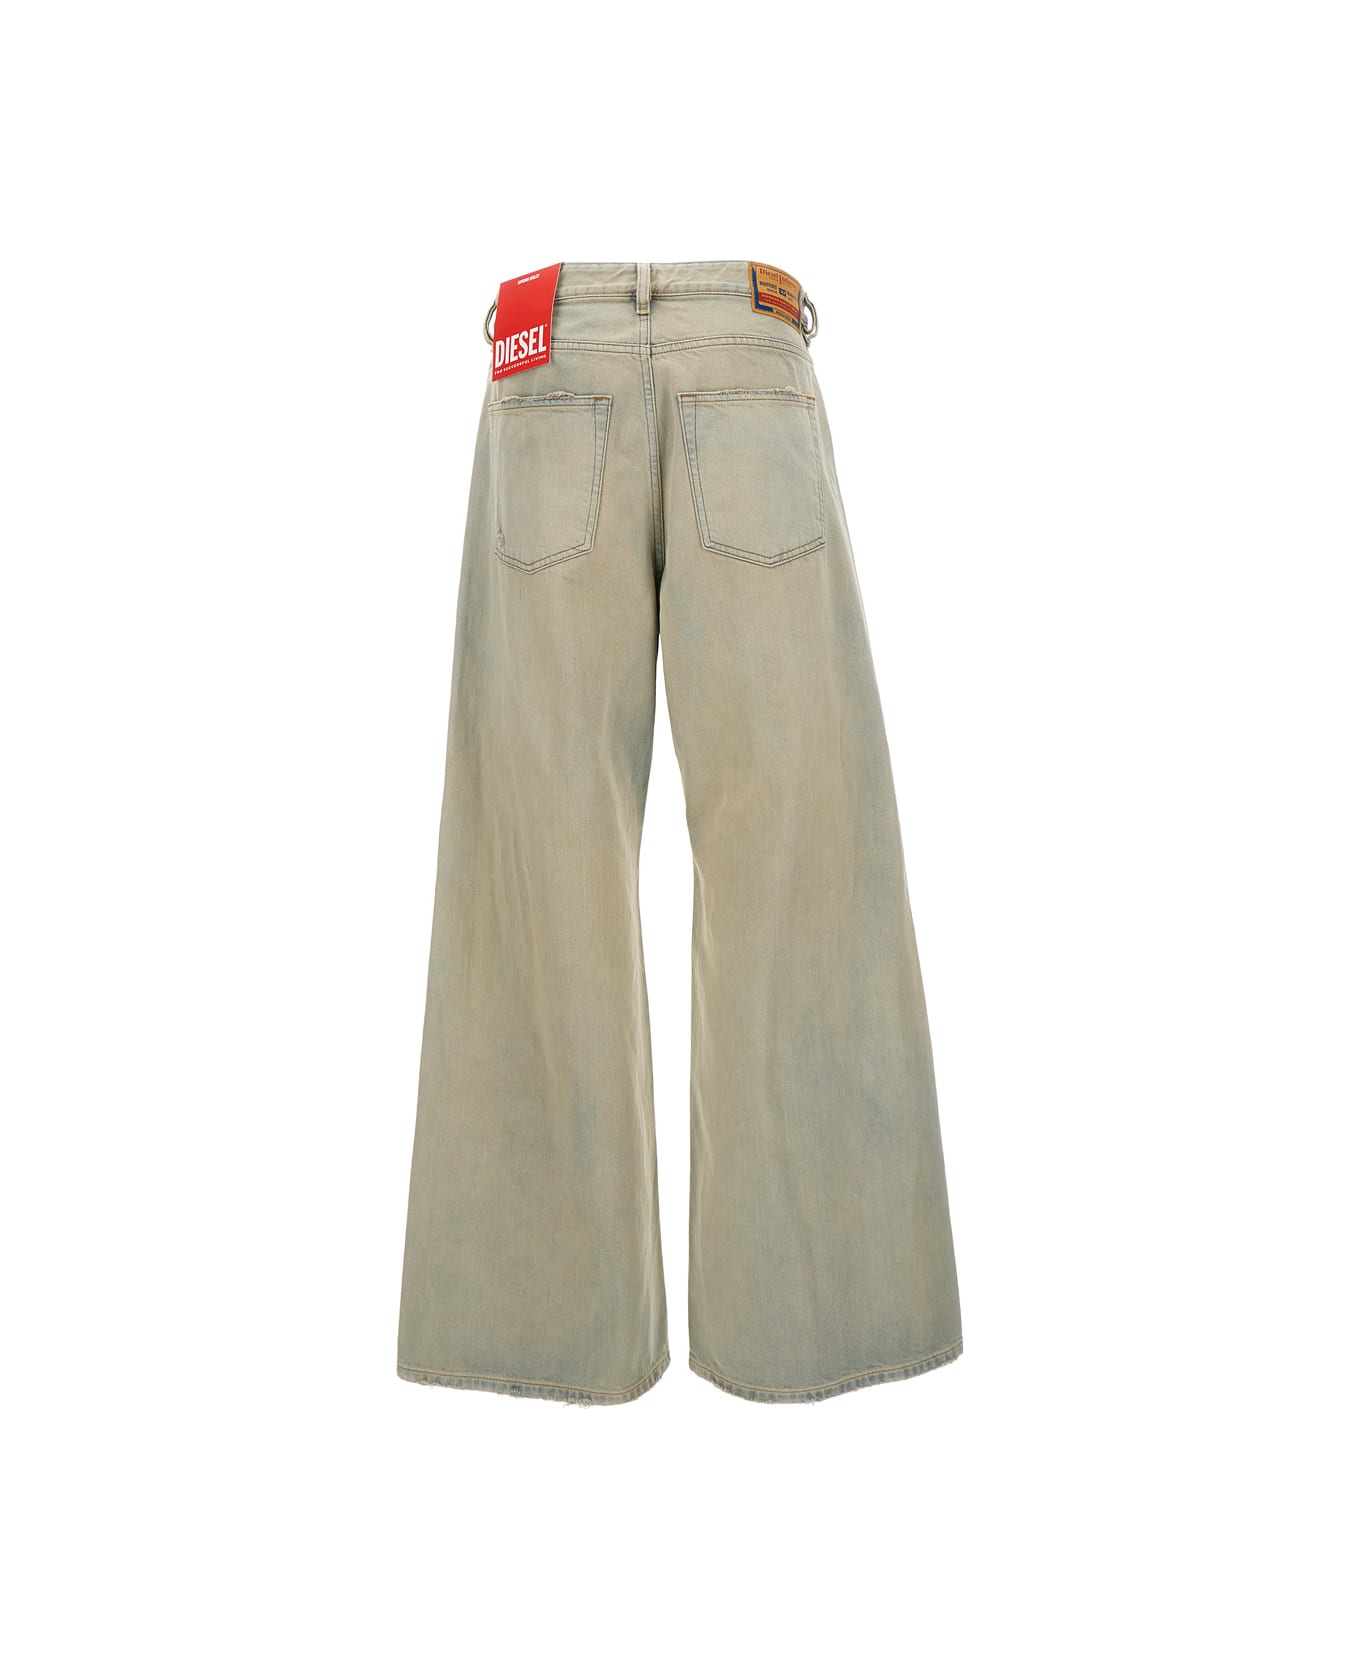 Diesel 1996 D-sire Low-rise Wide-leg Washed Jeans